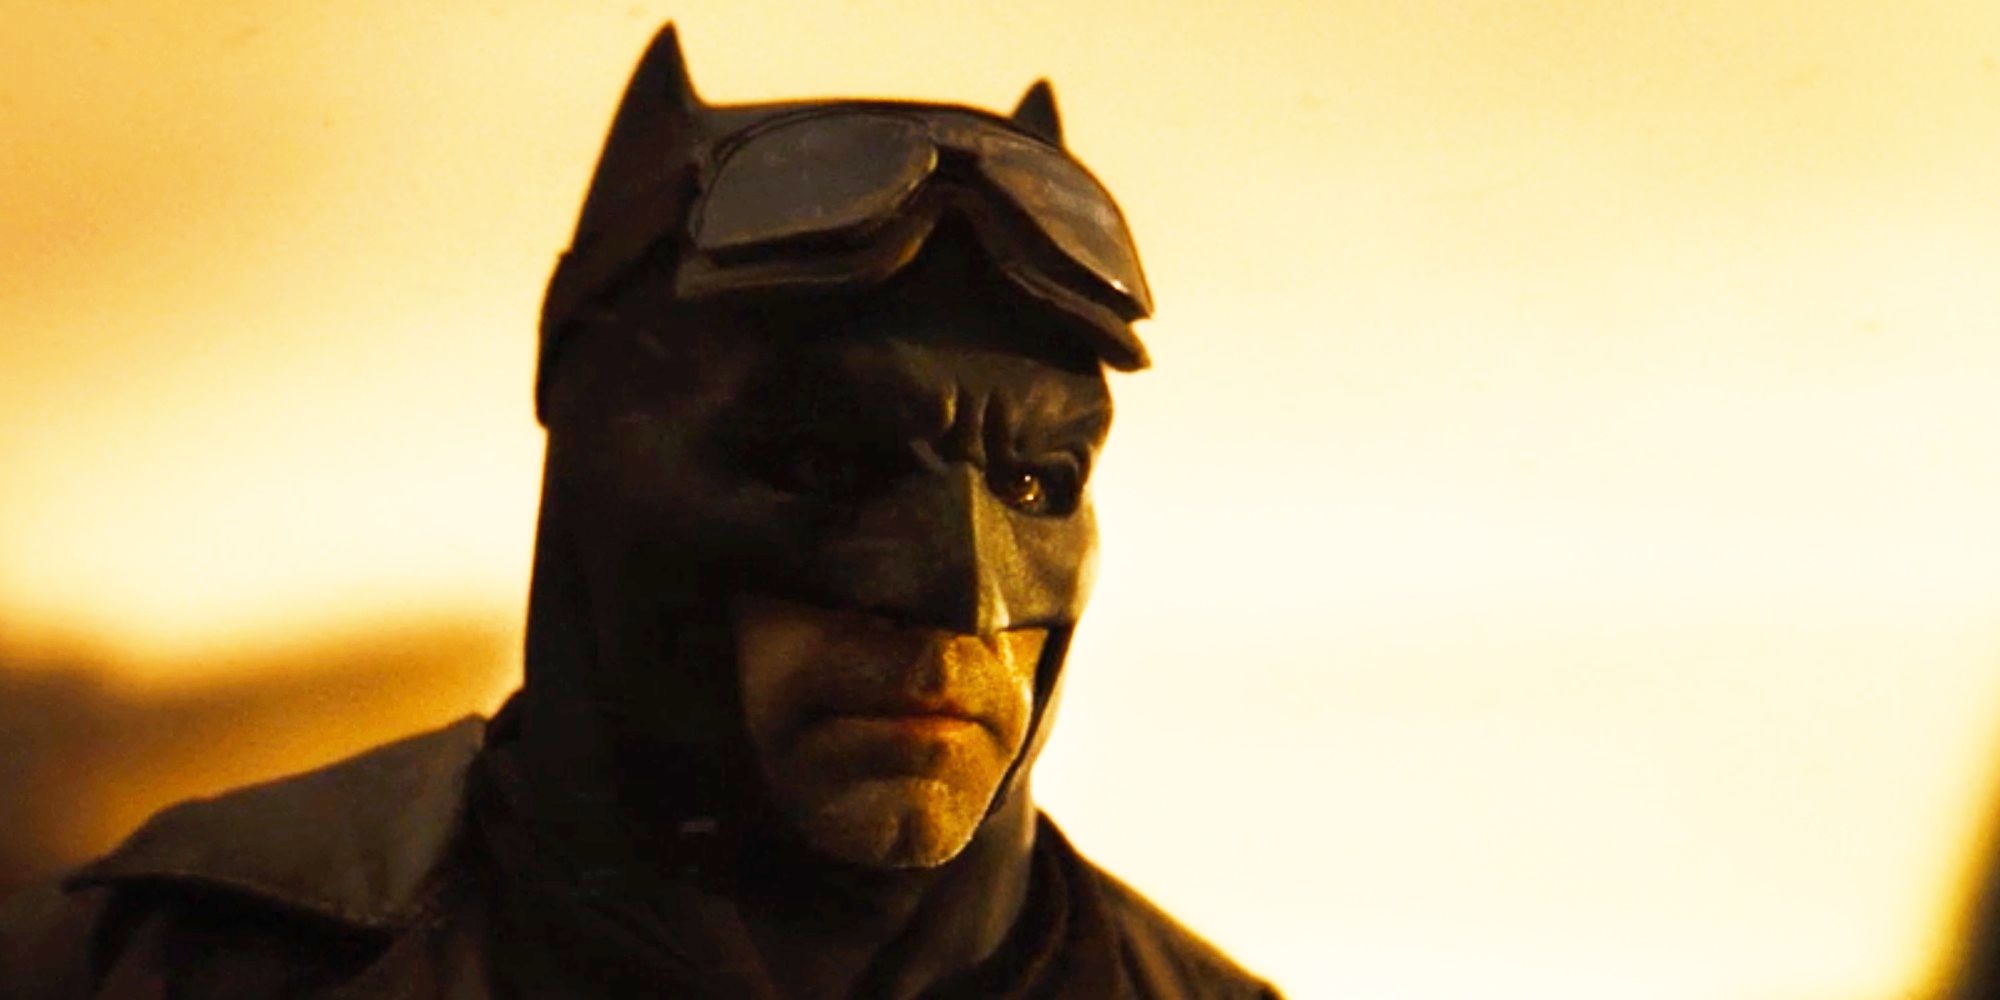 Batman looking serious as the sun sets in Zack Snyder's Justice League.